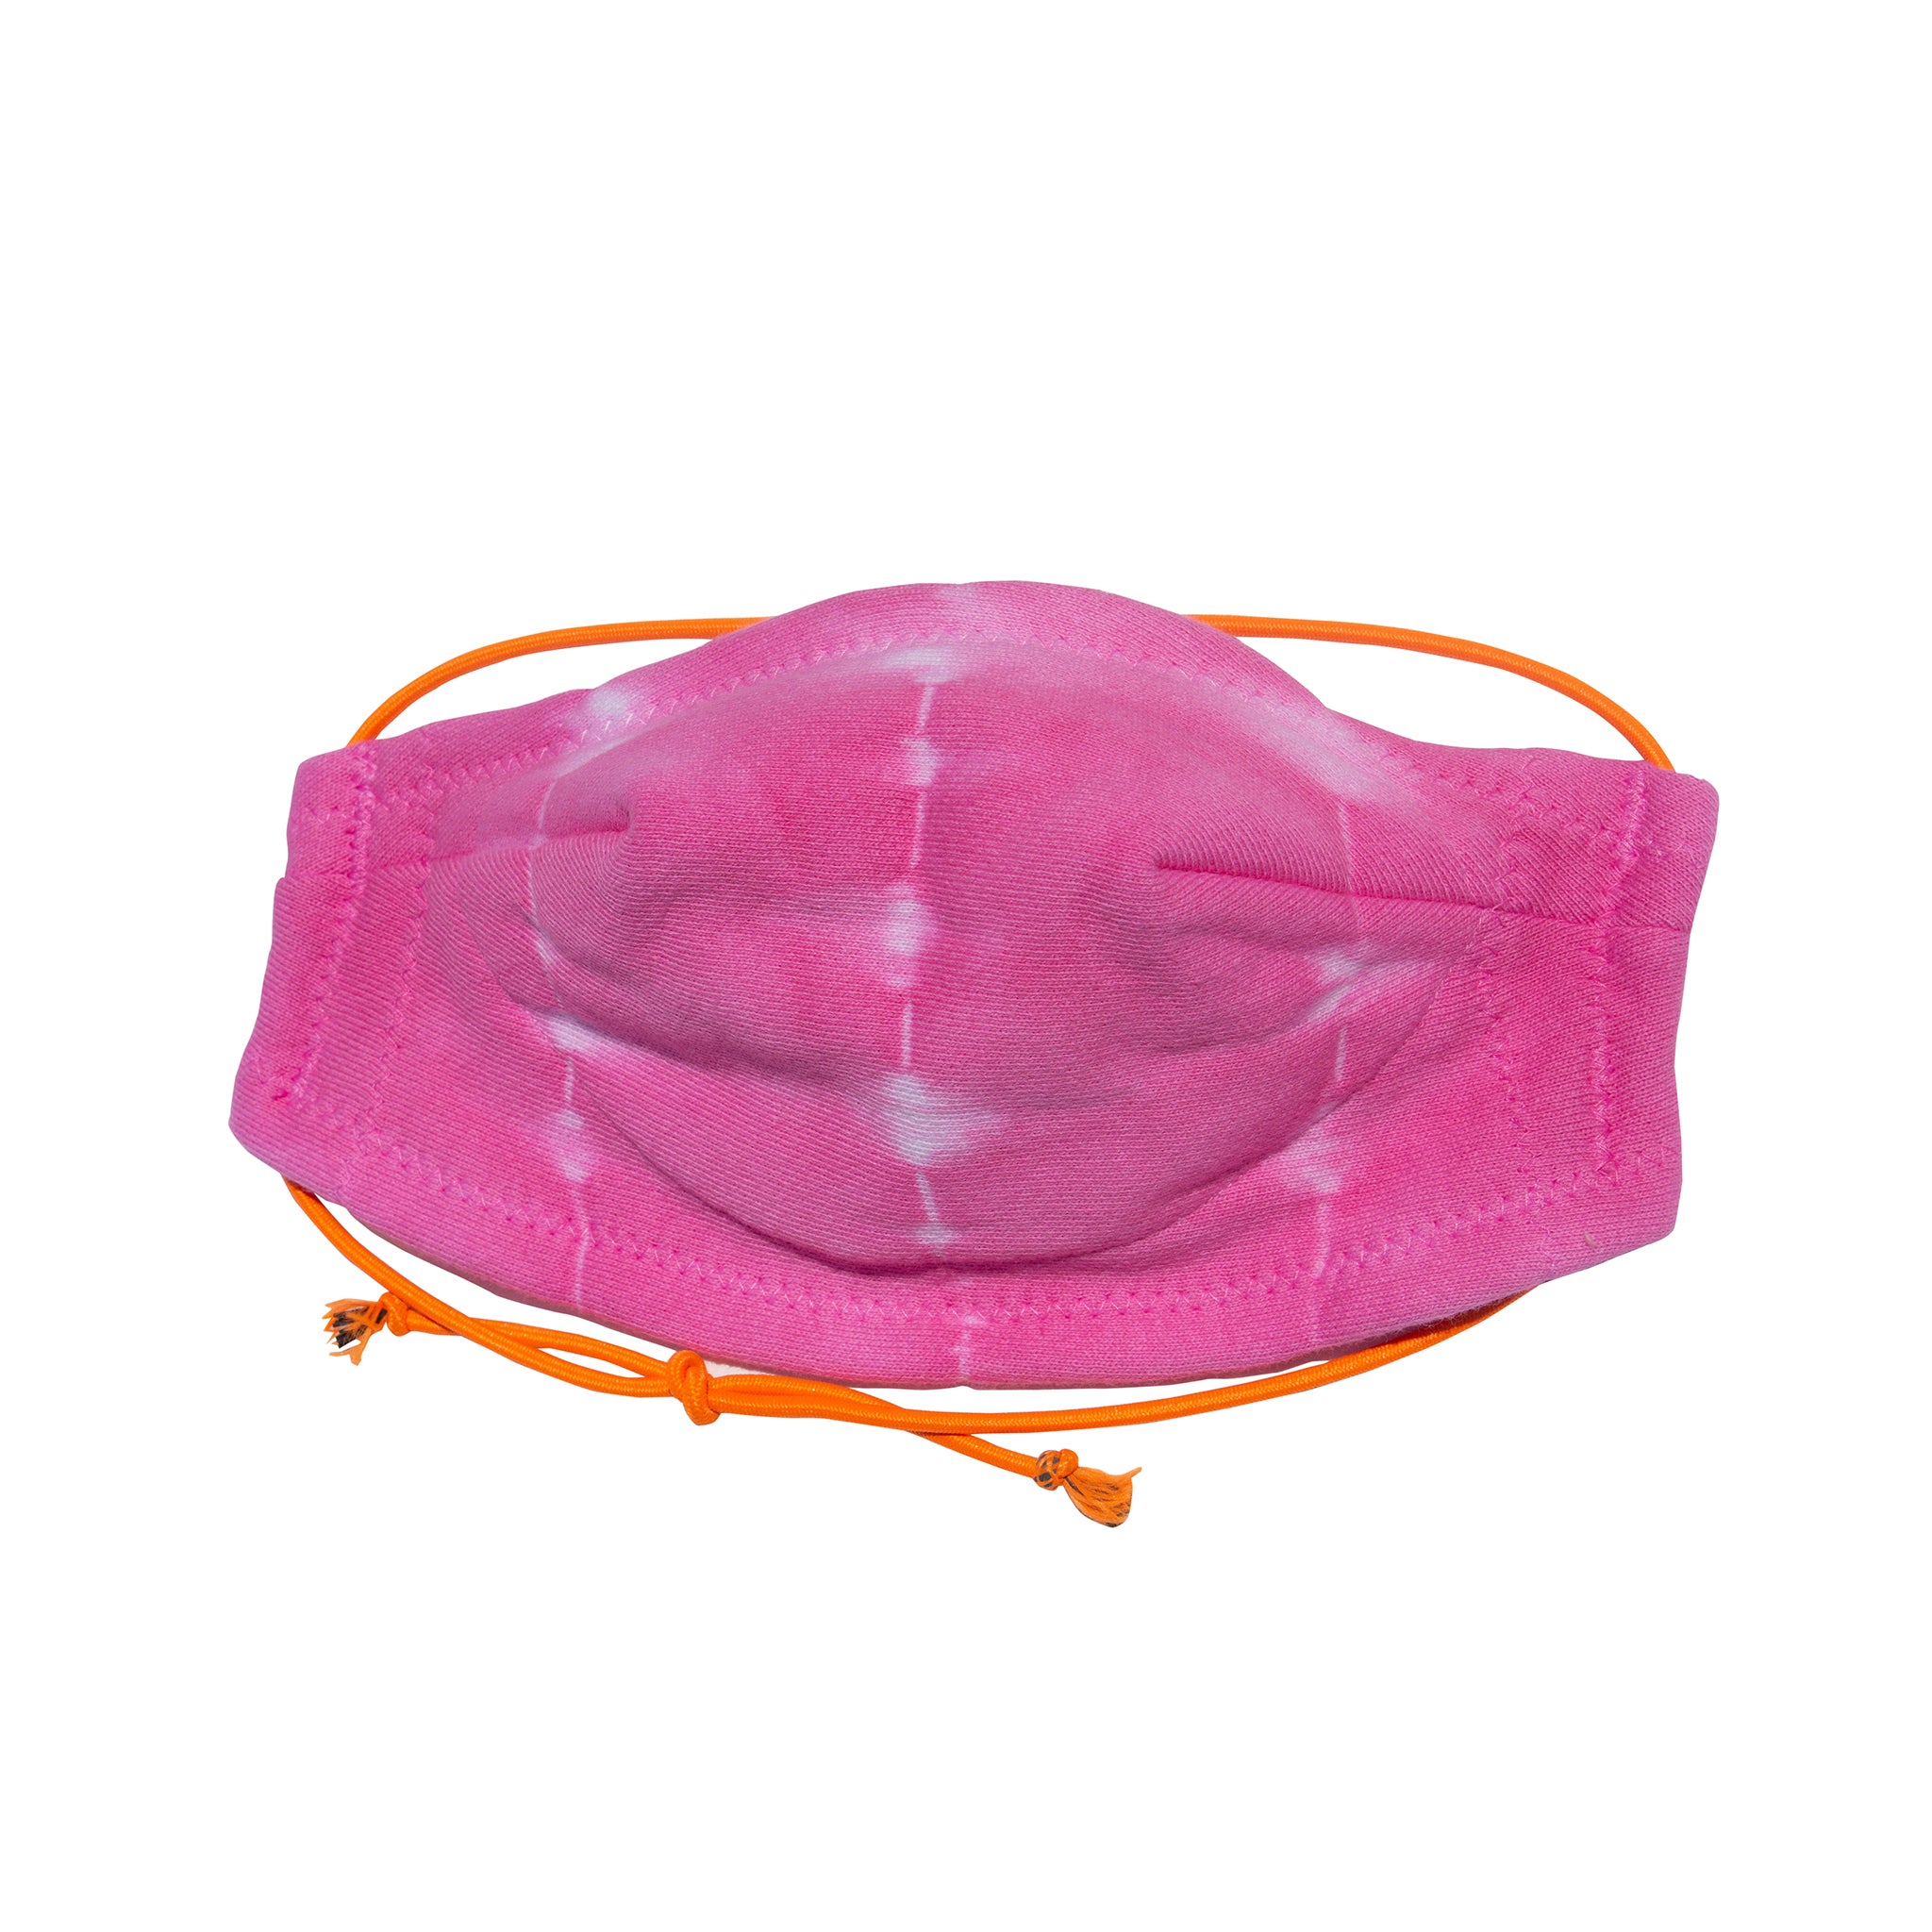 Hand Made 100% Cotton Bamboo tie dyed lightweight 5 layer Face Mask with adjustable strap in Fucshia.